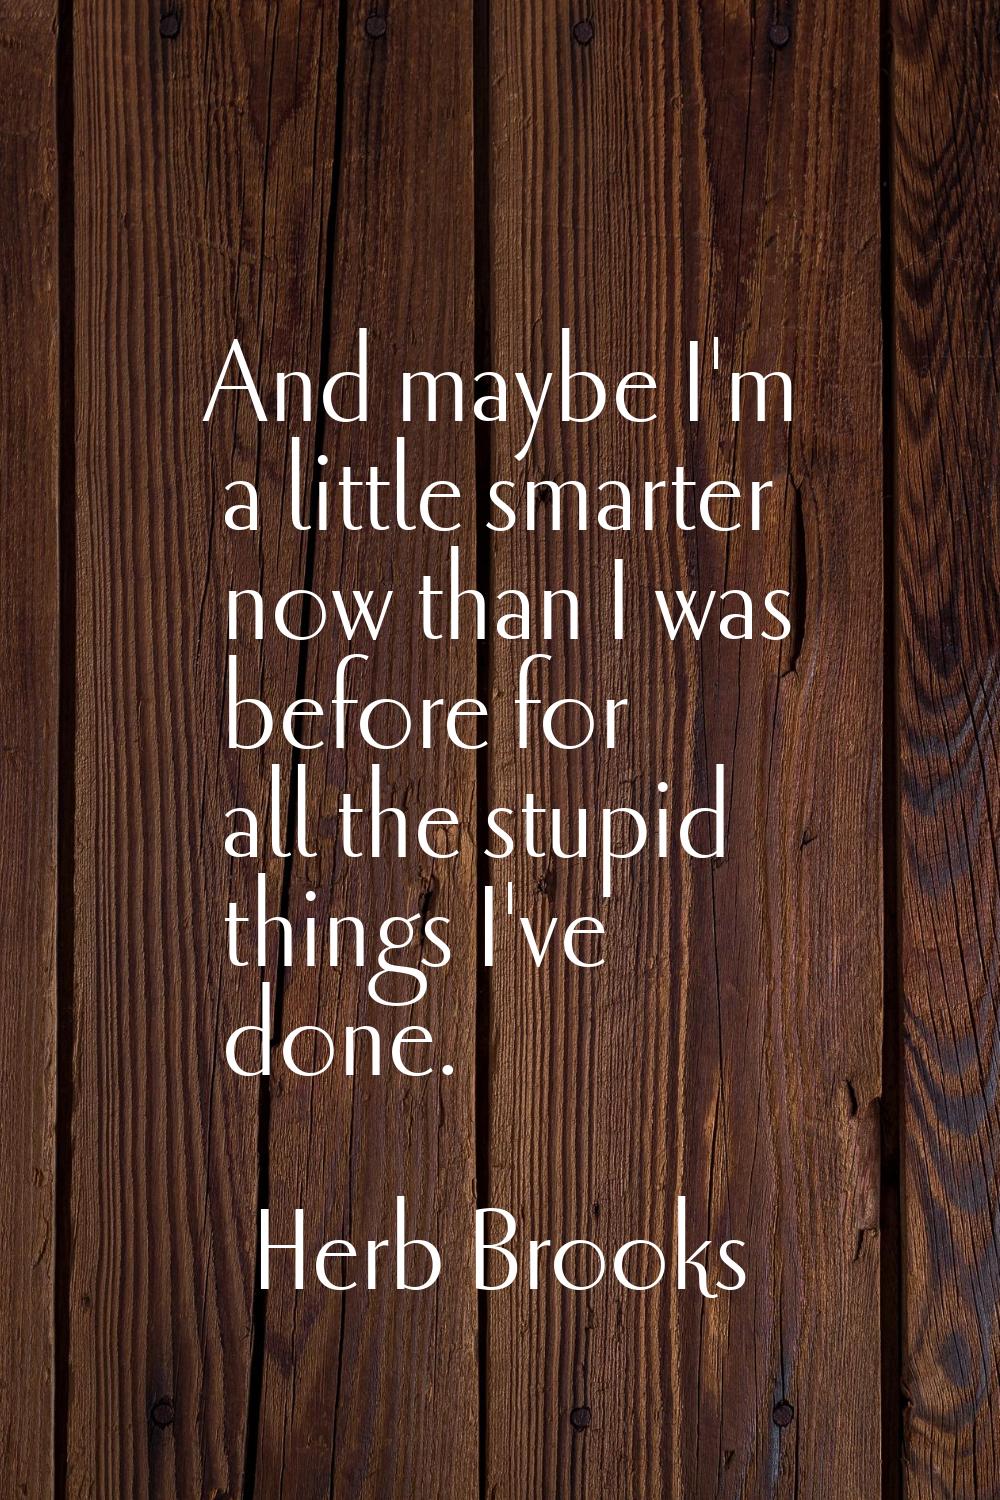 And maybe I'm a little smarter now than I was before for all the stupid things I've done.